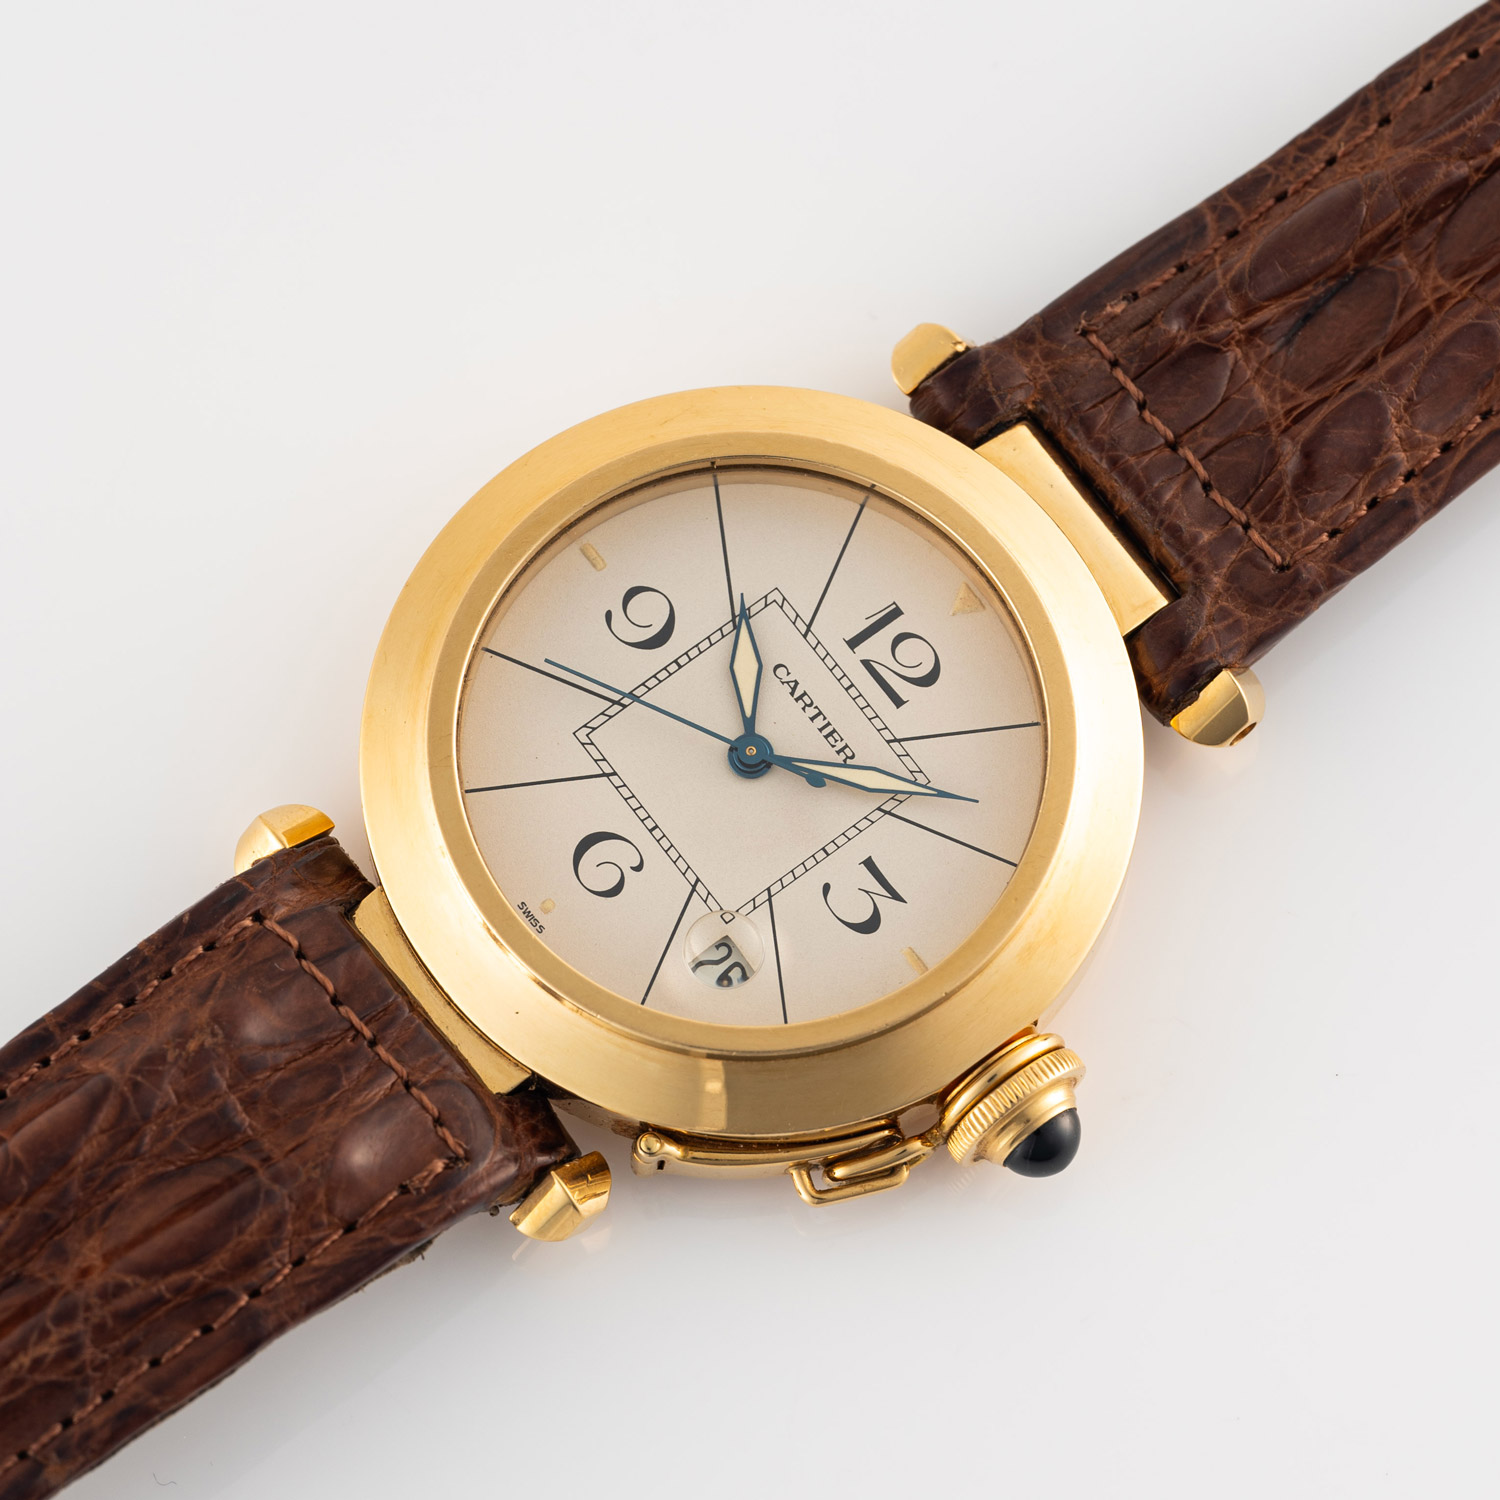 A GENTLEMAN'S SIZE 18K SOLID YELLOW GOLD CARTIER PASHA AUTOMATIC WRIST WATCH CIRCA 1990s, REF. - Image 4 of 7